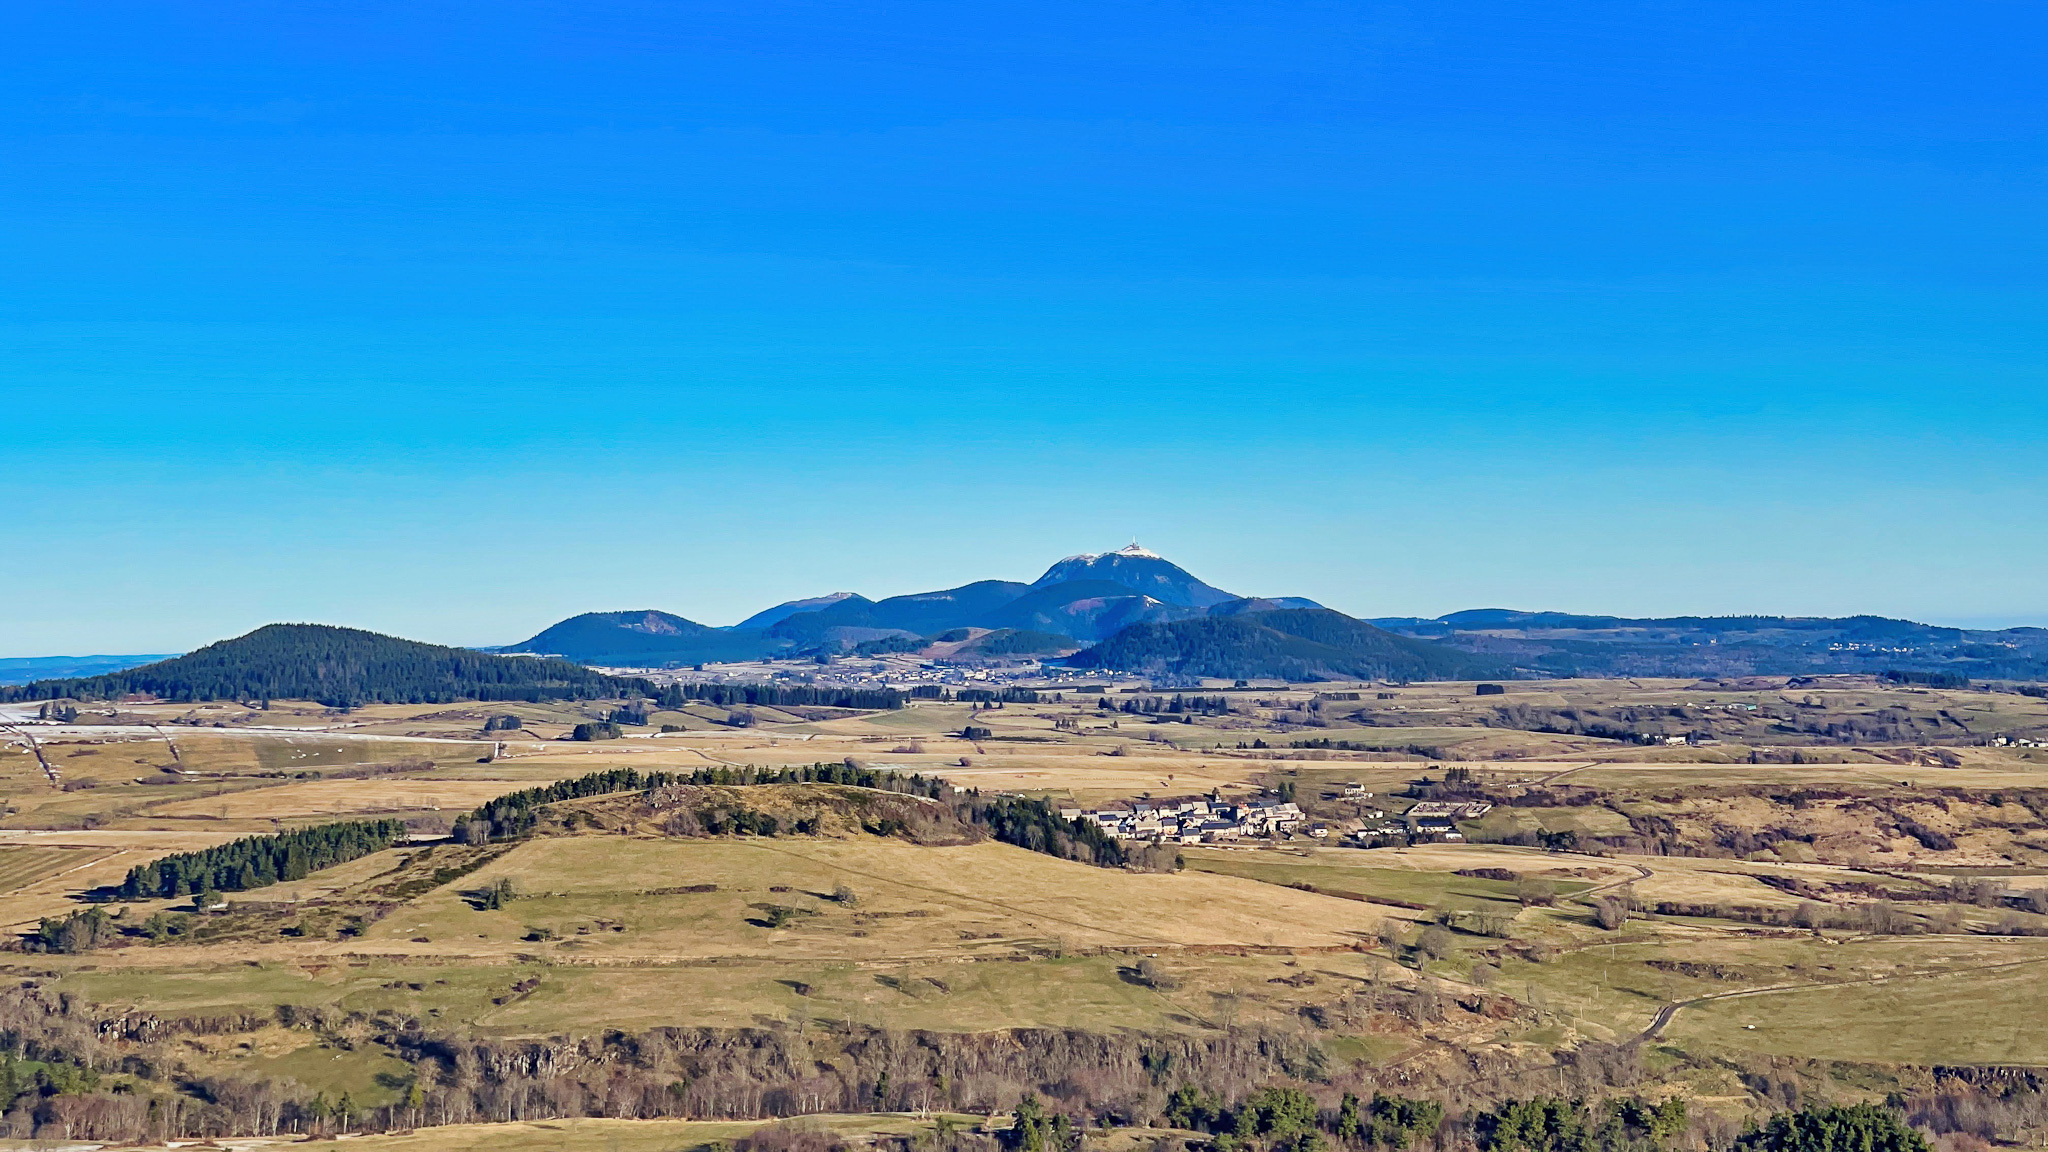 The Chaîne des Puys and the summit of the Puy de Dôme